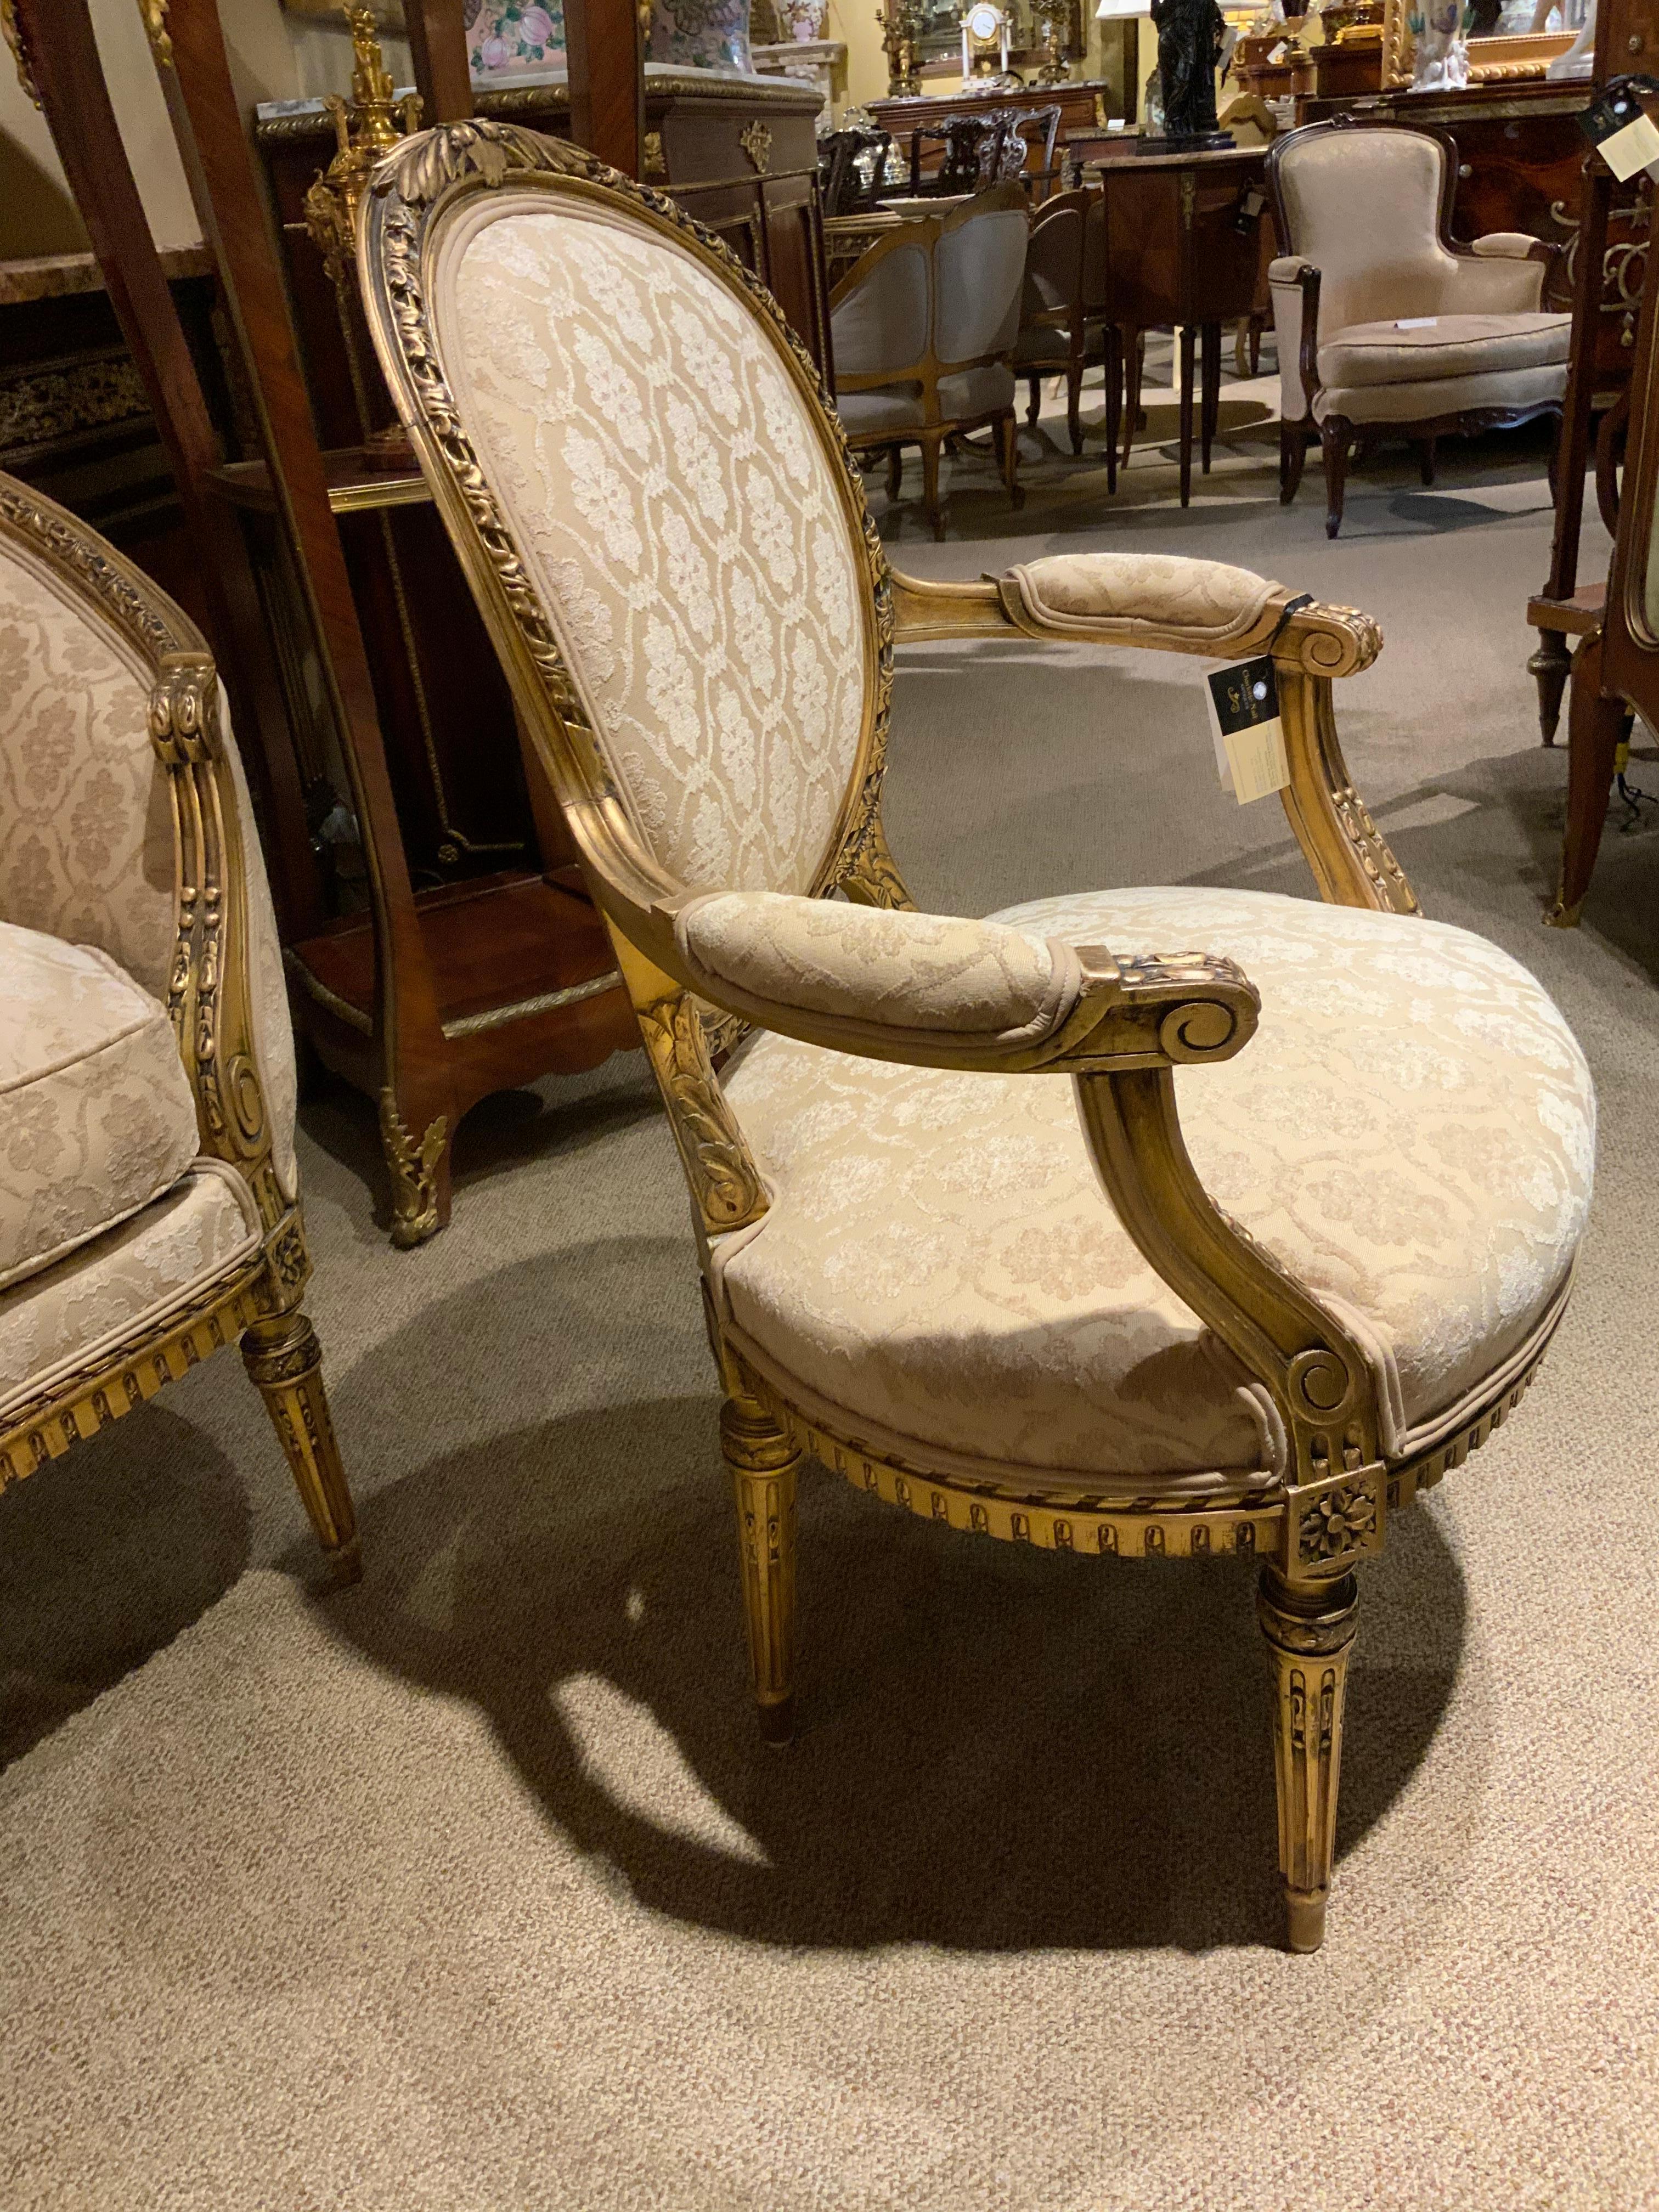 19th Century French Giltwood Three Piece Love Seat with Two Arm Chairs in Cream Hue For Sale